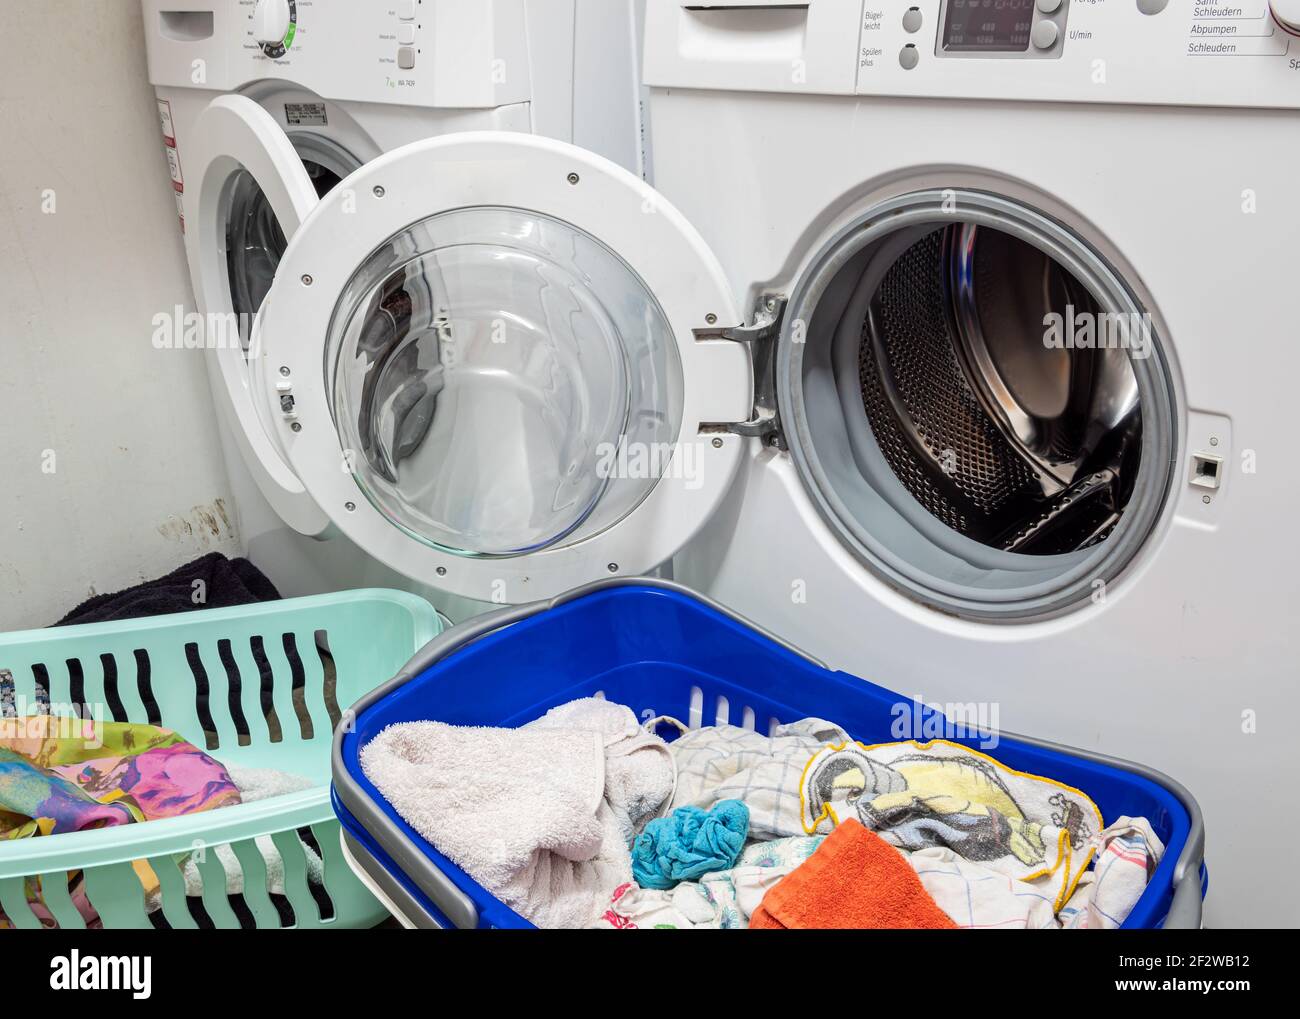 Laundry basket with dirty laundry and washing machine at home Stock Photo